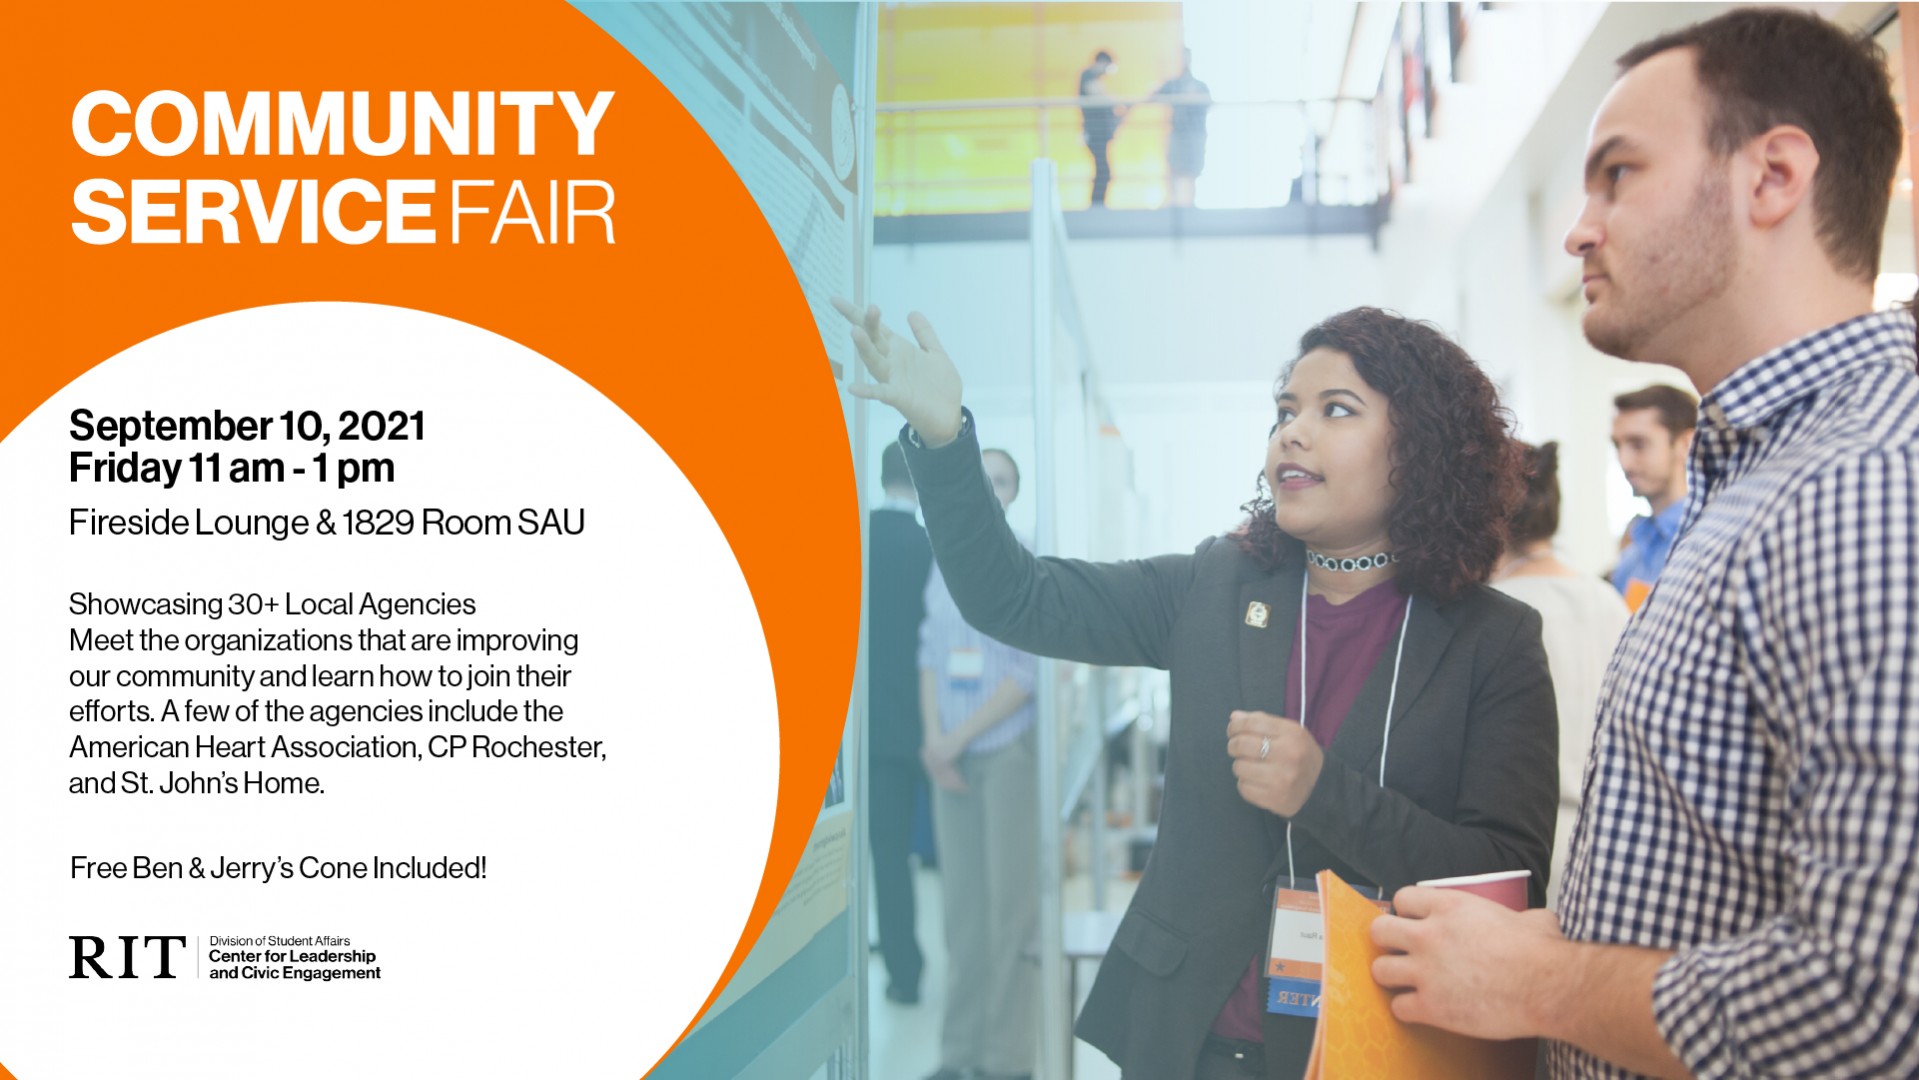 On the right side of the image, a woman and a man are engaged in conversation with each other, as the woman points to an object off screen. To the left of the image, a white circle containing the event details sits inside of a larger orange circle, which contains the name of the event "Community Service Fair".